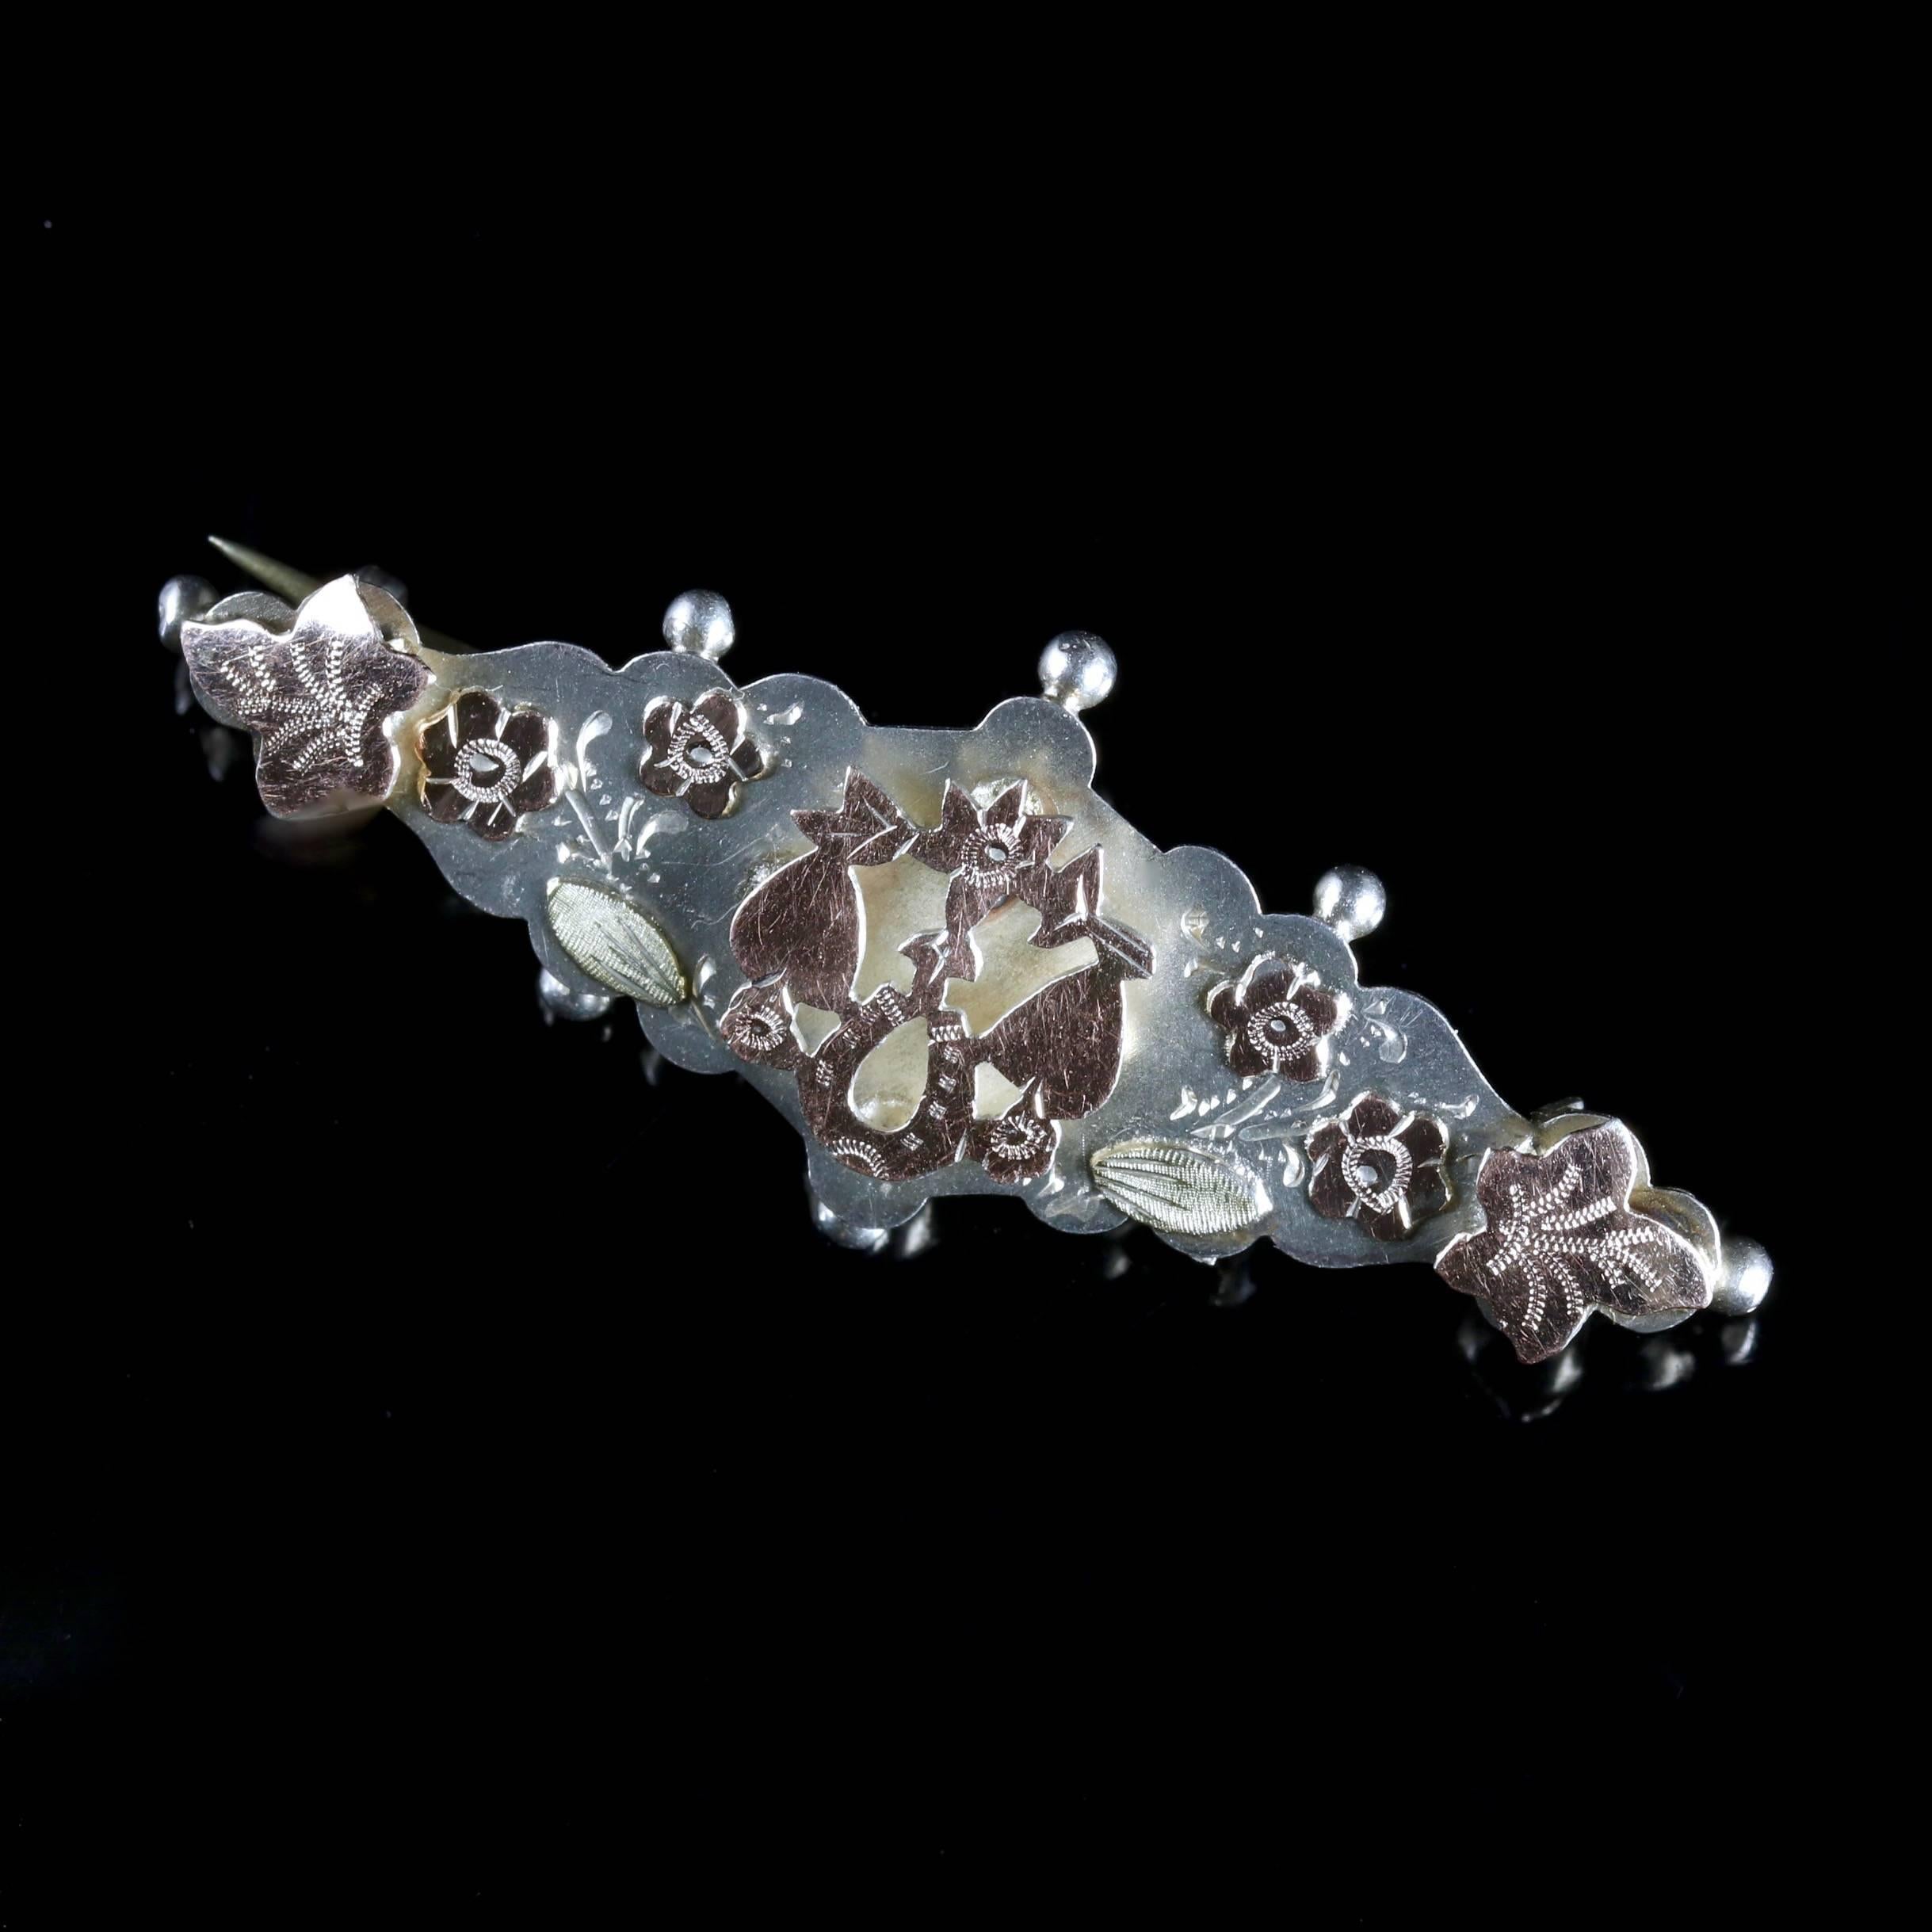 This Victorian Sterling Silver brooch is wonderful, Circa 1900.

The broach depicts lovely flowers and a horseshoe engraved in the centre, which is set in a high carat Gold.

The brooch boasts wonderful workmanship of it’s time.

It is steeped in